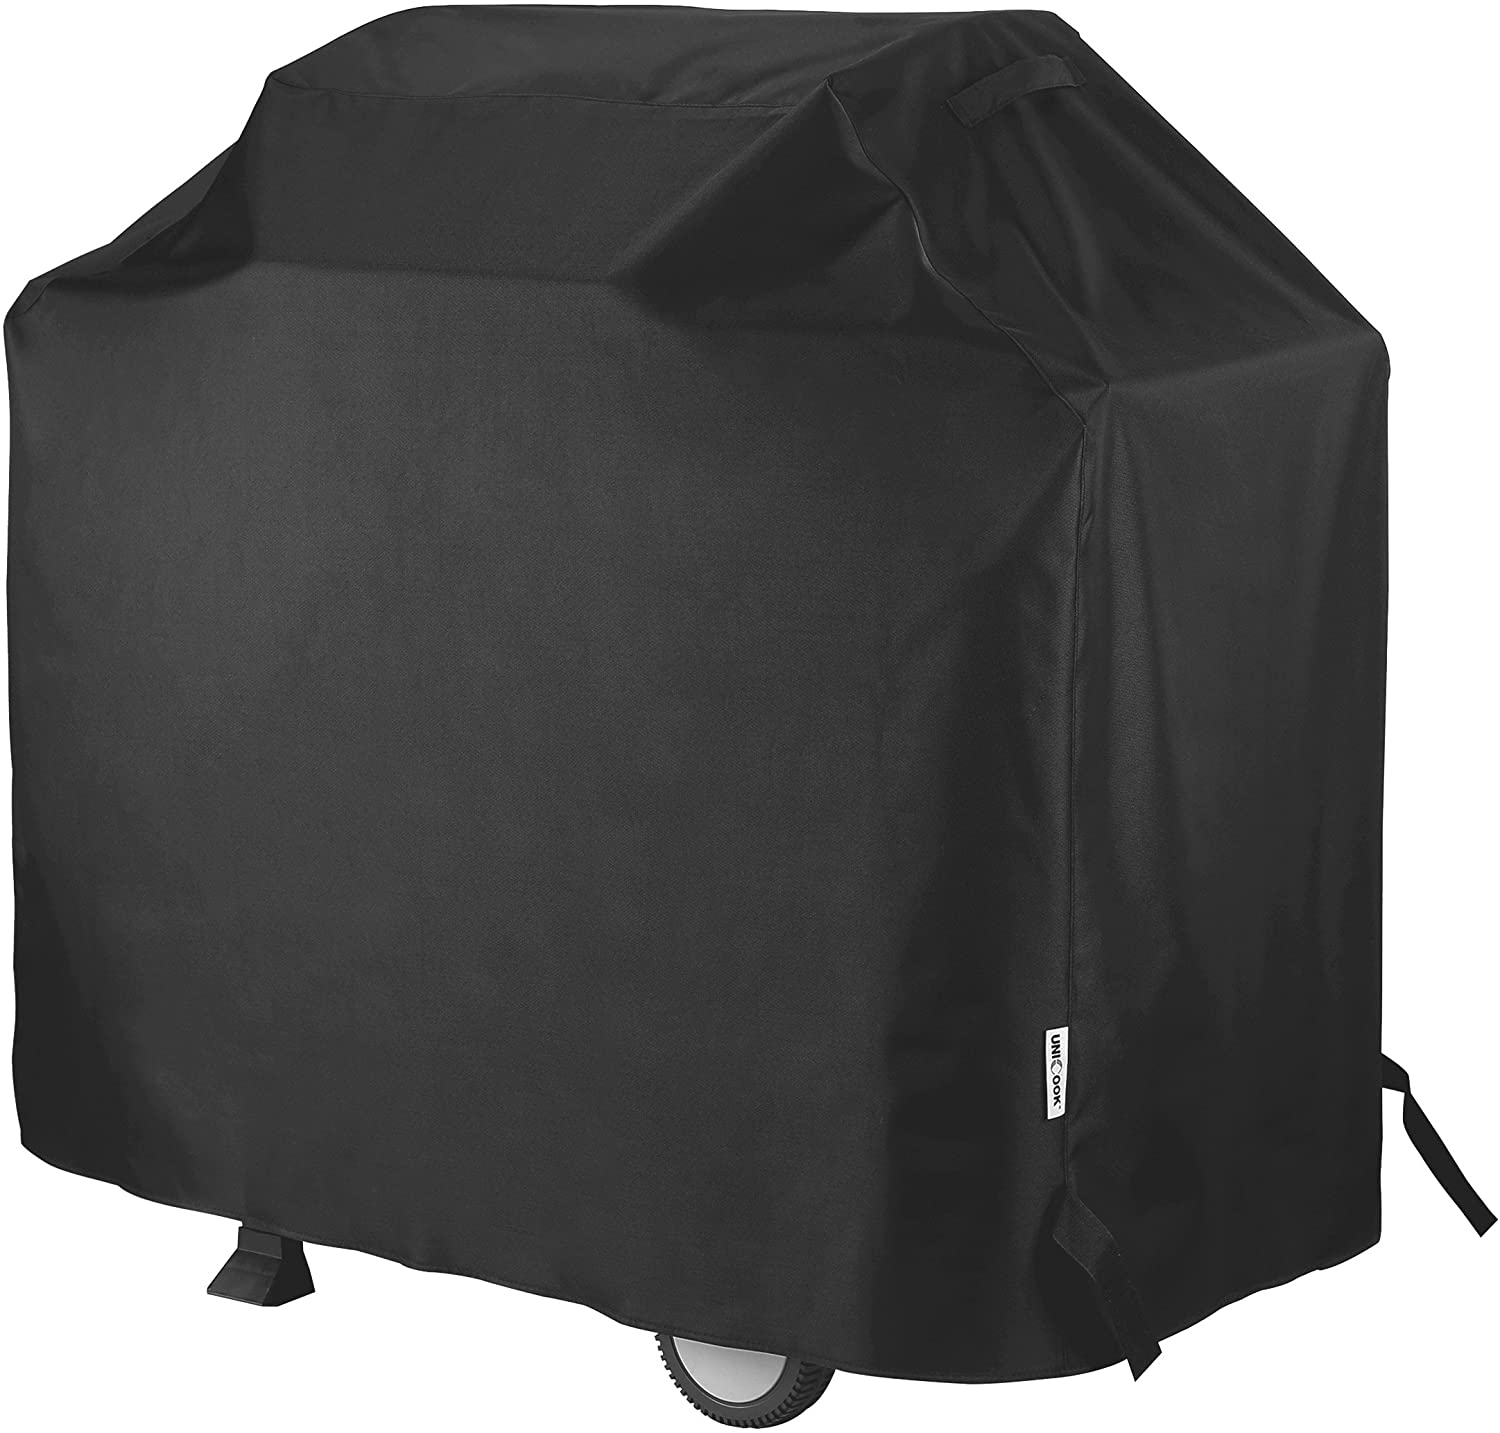 Heavy Duty Waterproof Barbecue Gas Grill Cover, Small 50inch BBQ Cover, Special Fade and UV